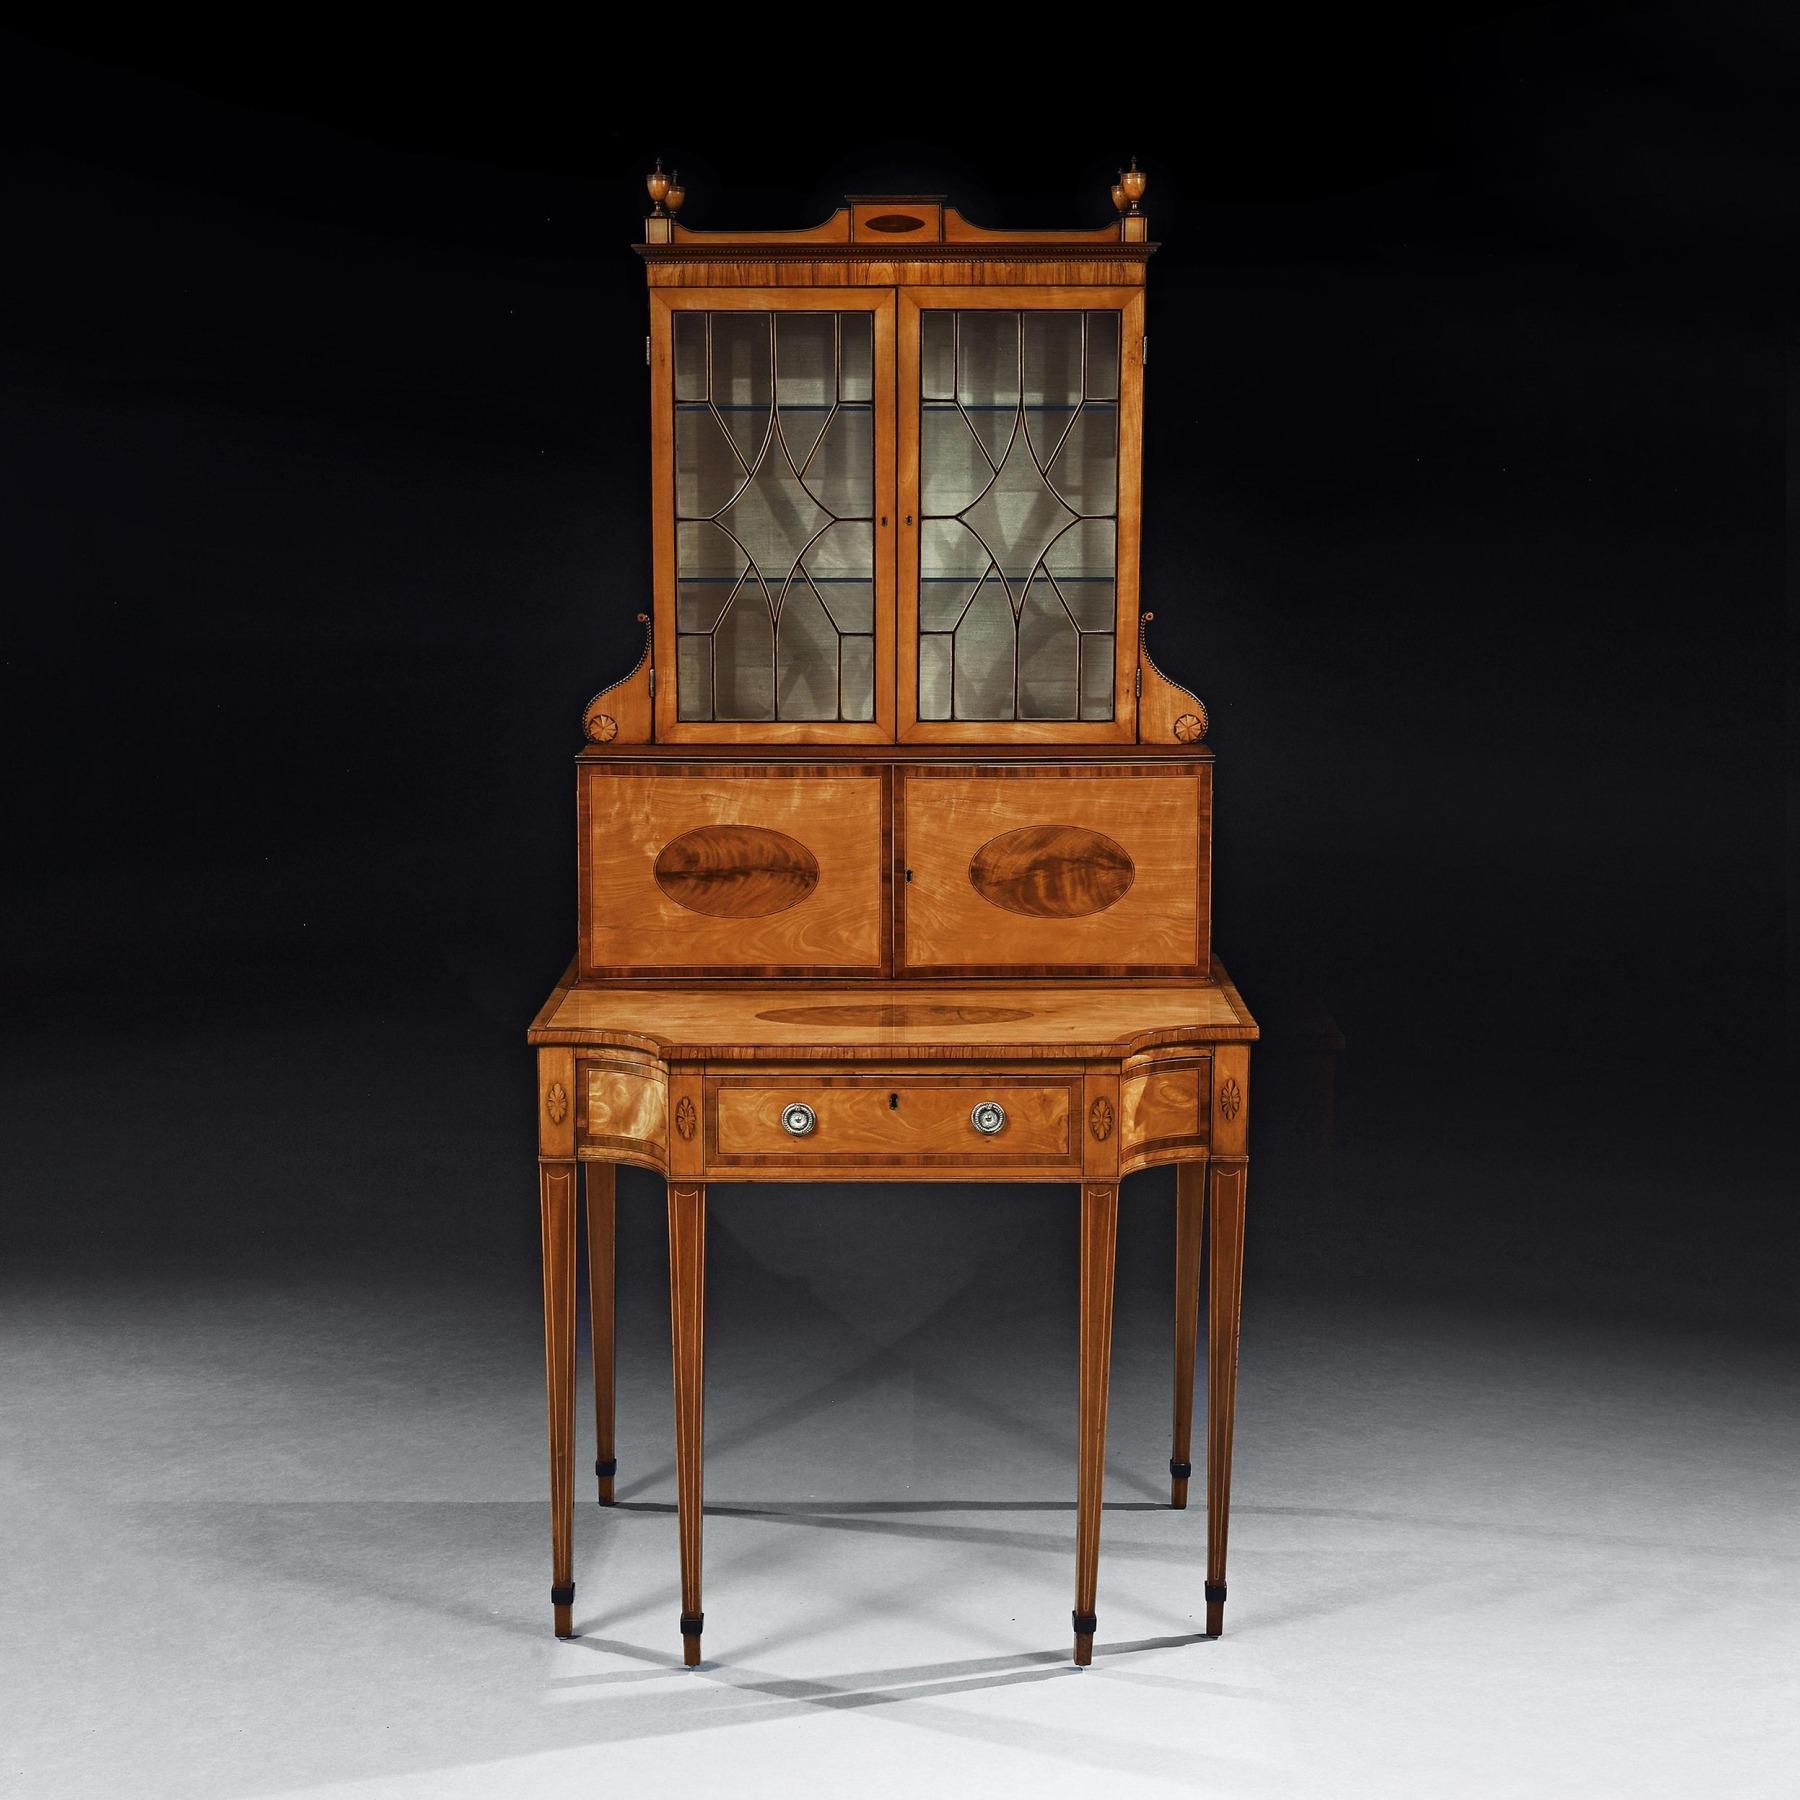  An Important 18th Century George Iii Satinwood and Sabicu Writing Cabinet For Sale 6